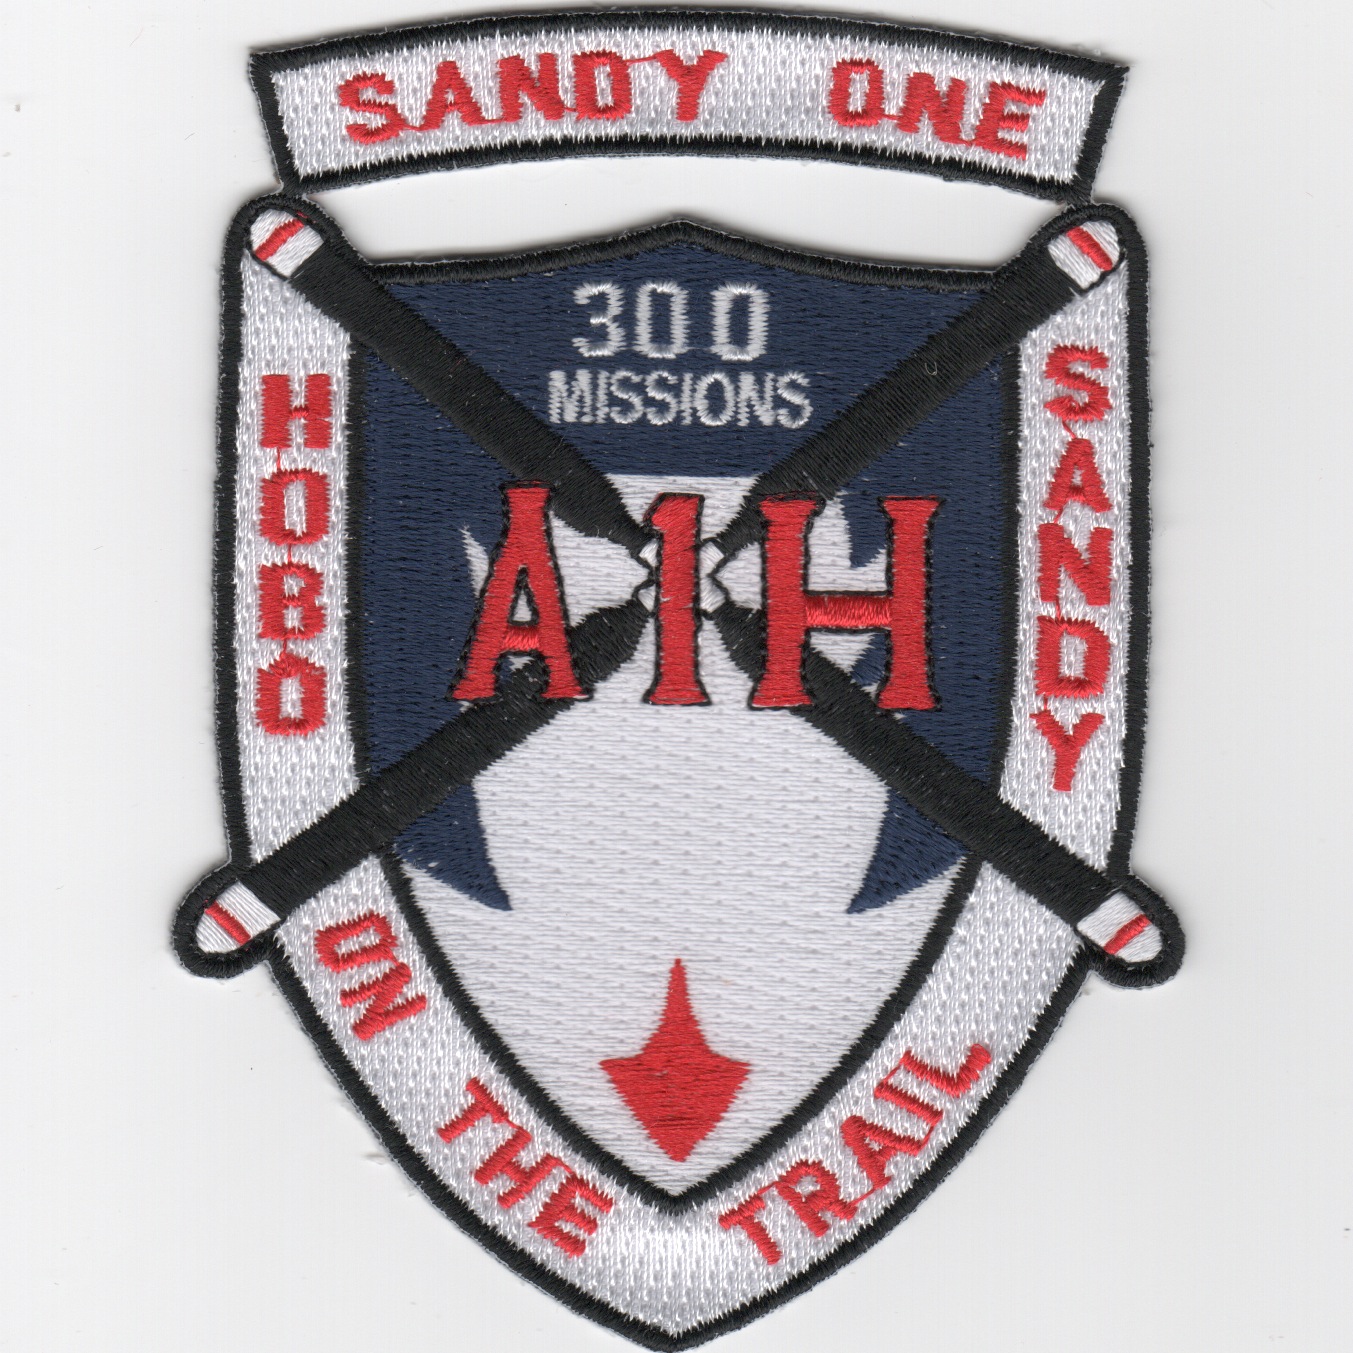 A-1H 'SANDY ONE' 300 Missions Patch